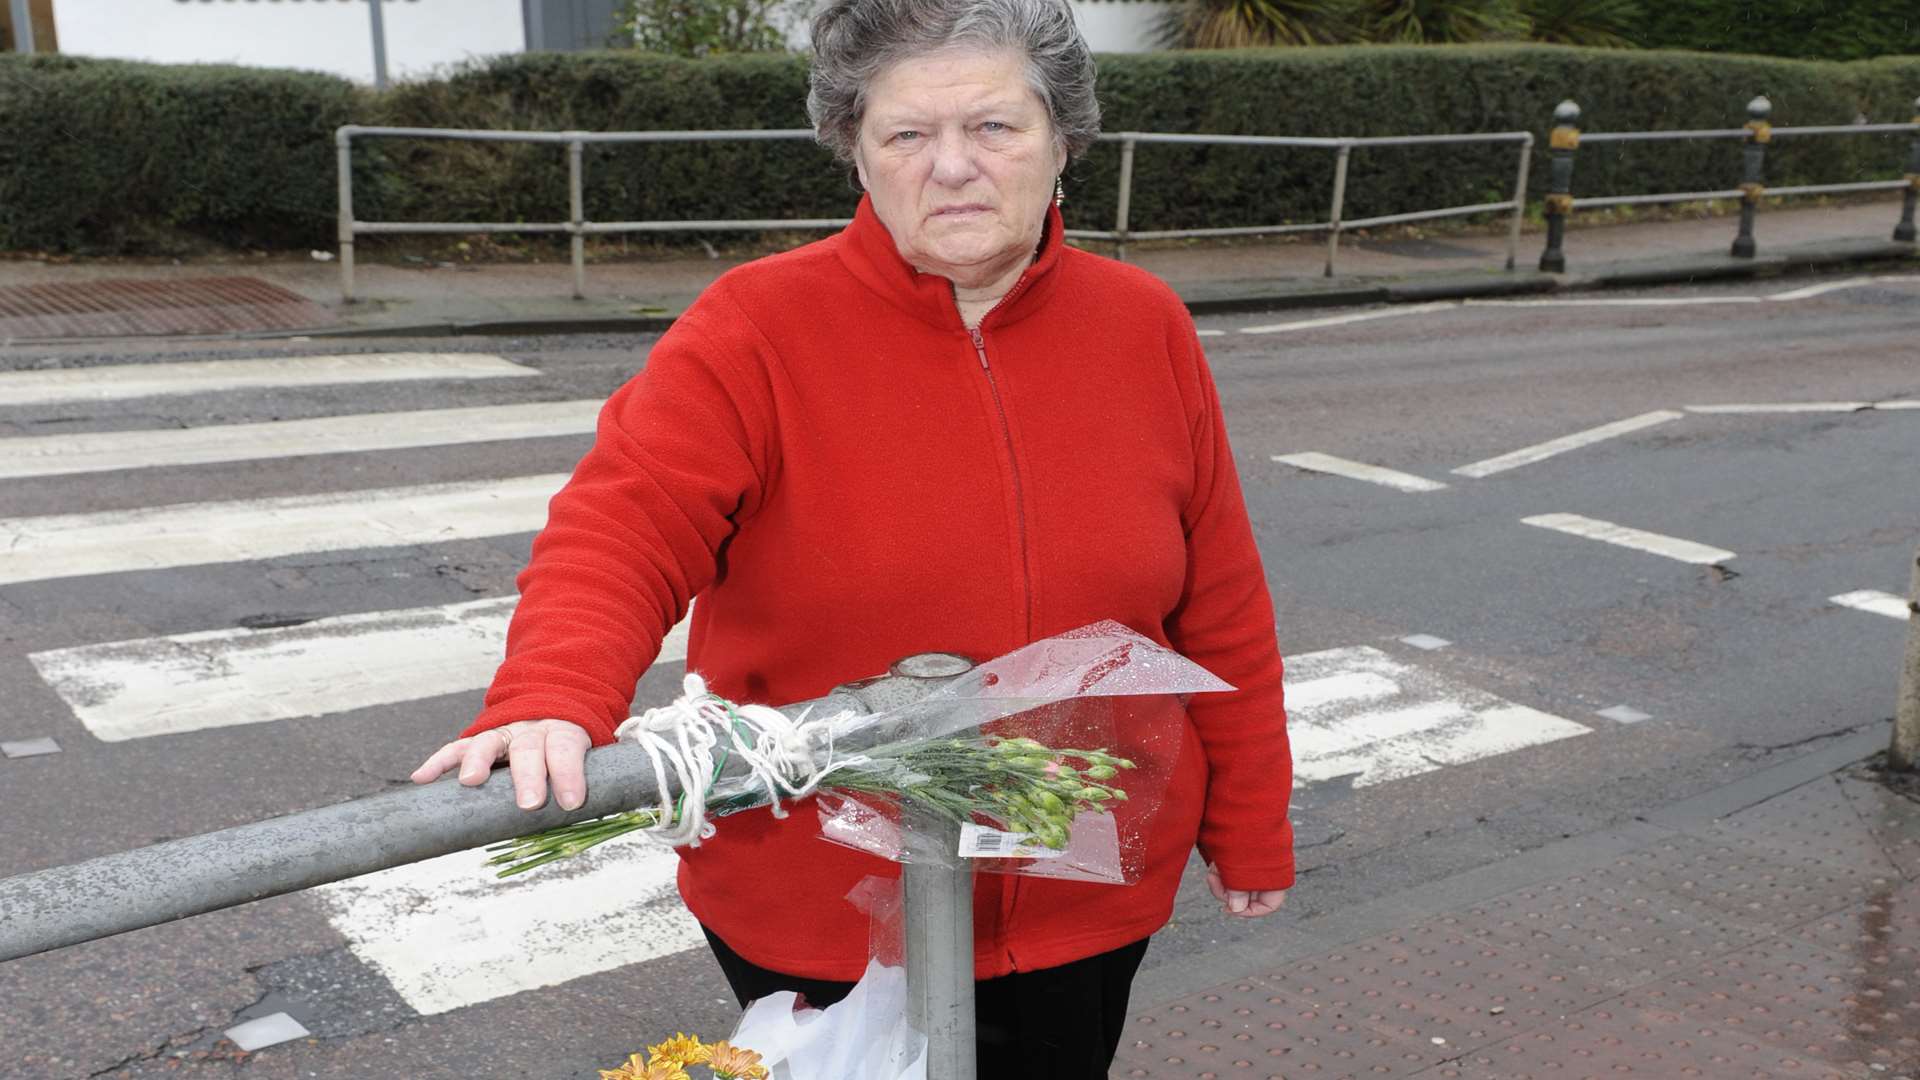 Doreen Taylor has collected more than 1000 signatures to make the crossing safer